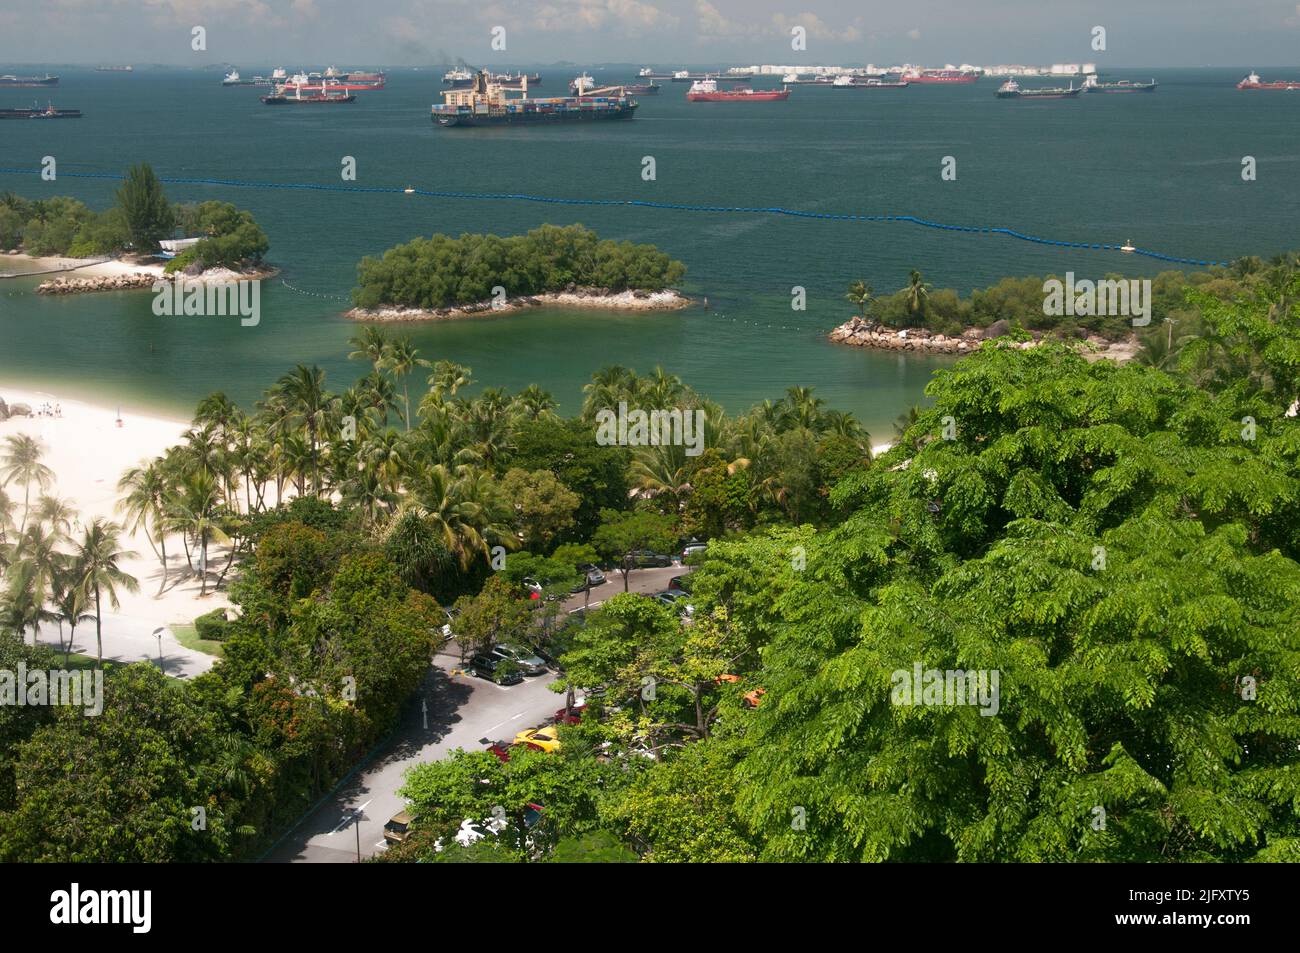 Sentosa Island beaches from above Siloso Beach, Singapore, beside a busy shipping channel Stock Photo